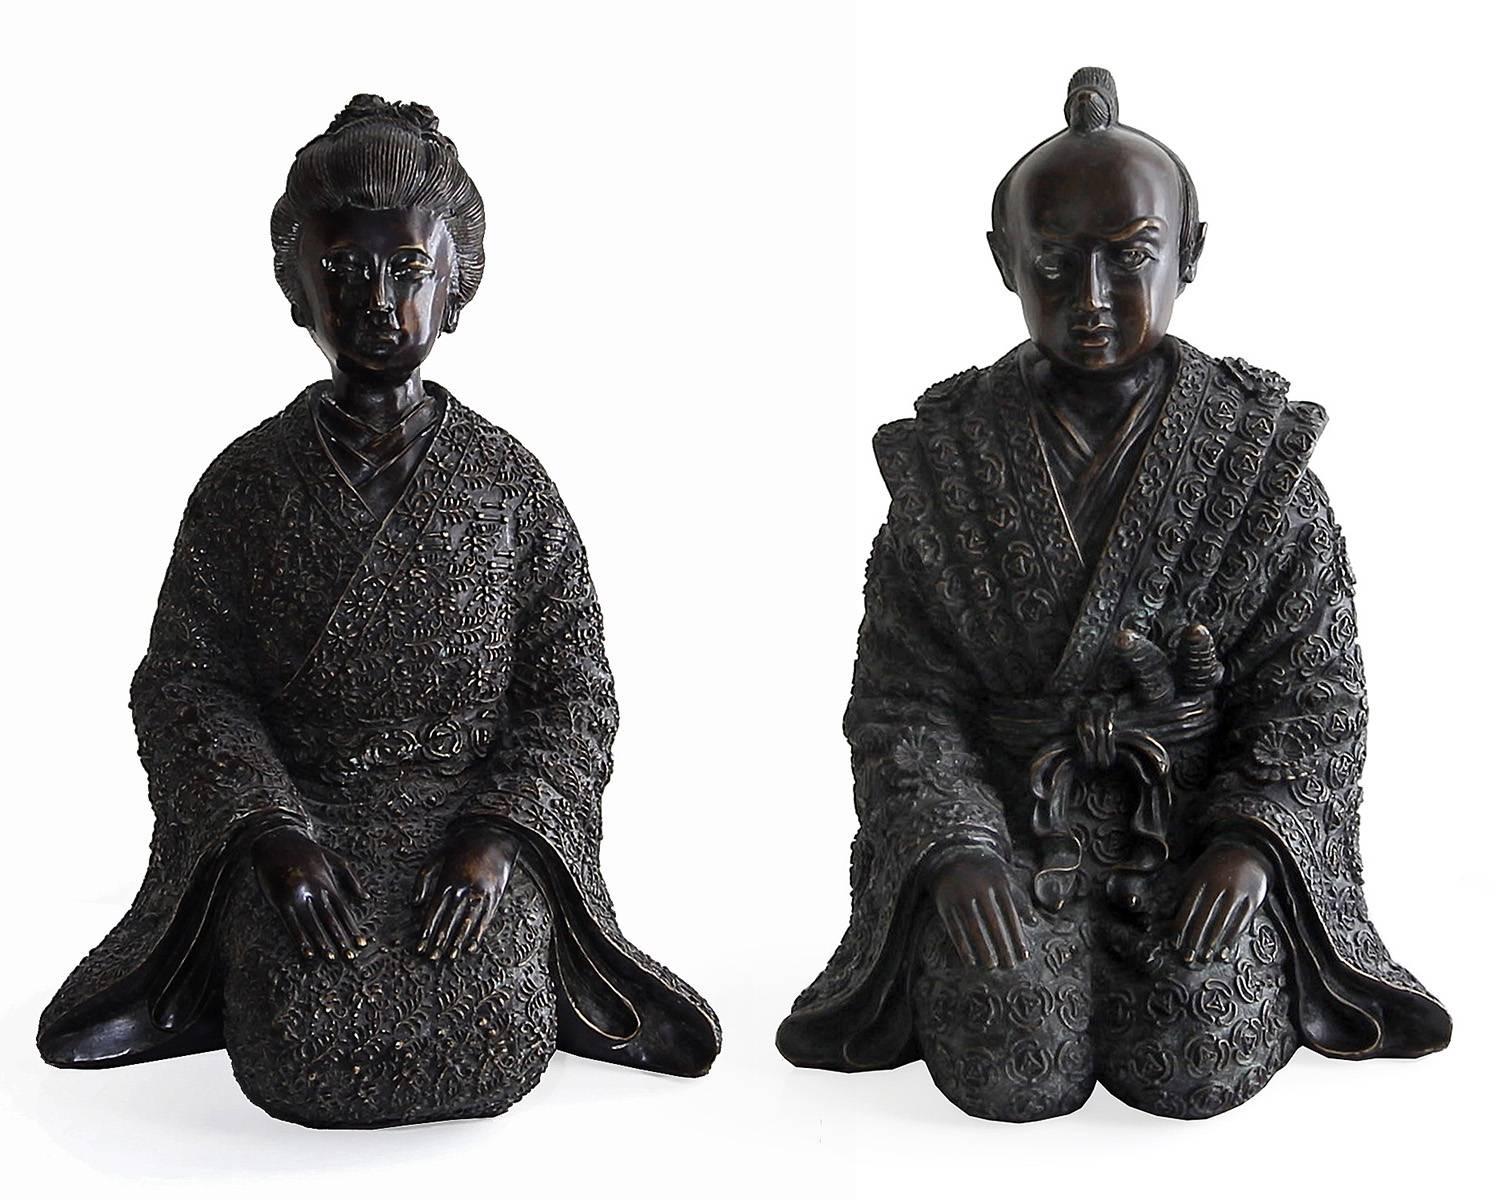 Beautiful pair of Japanese inspired bronze statues by the Maitland-Smith company, circa 1990s. Includes one geisha figure and one samurai, both in a kneeling position. Details on the figures, robes, faces and hair are done in high relief with high